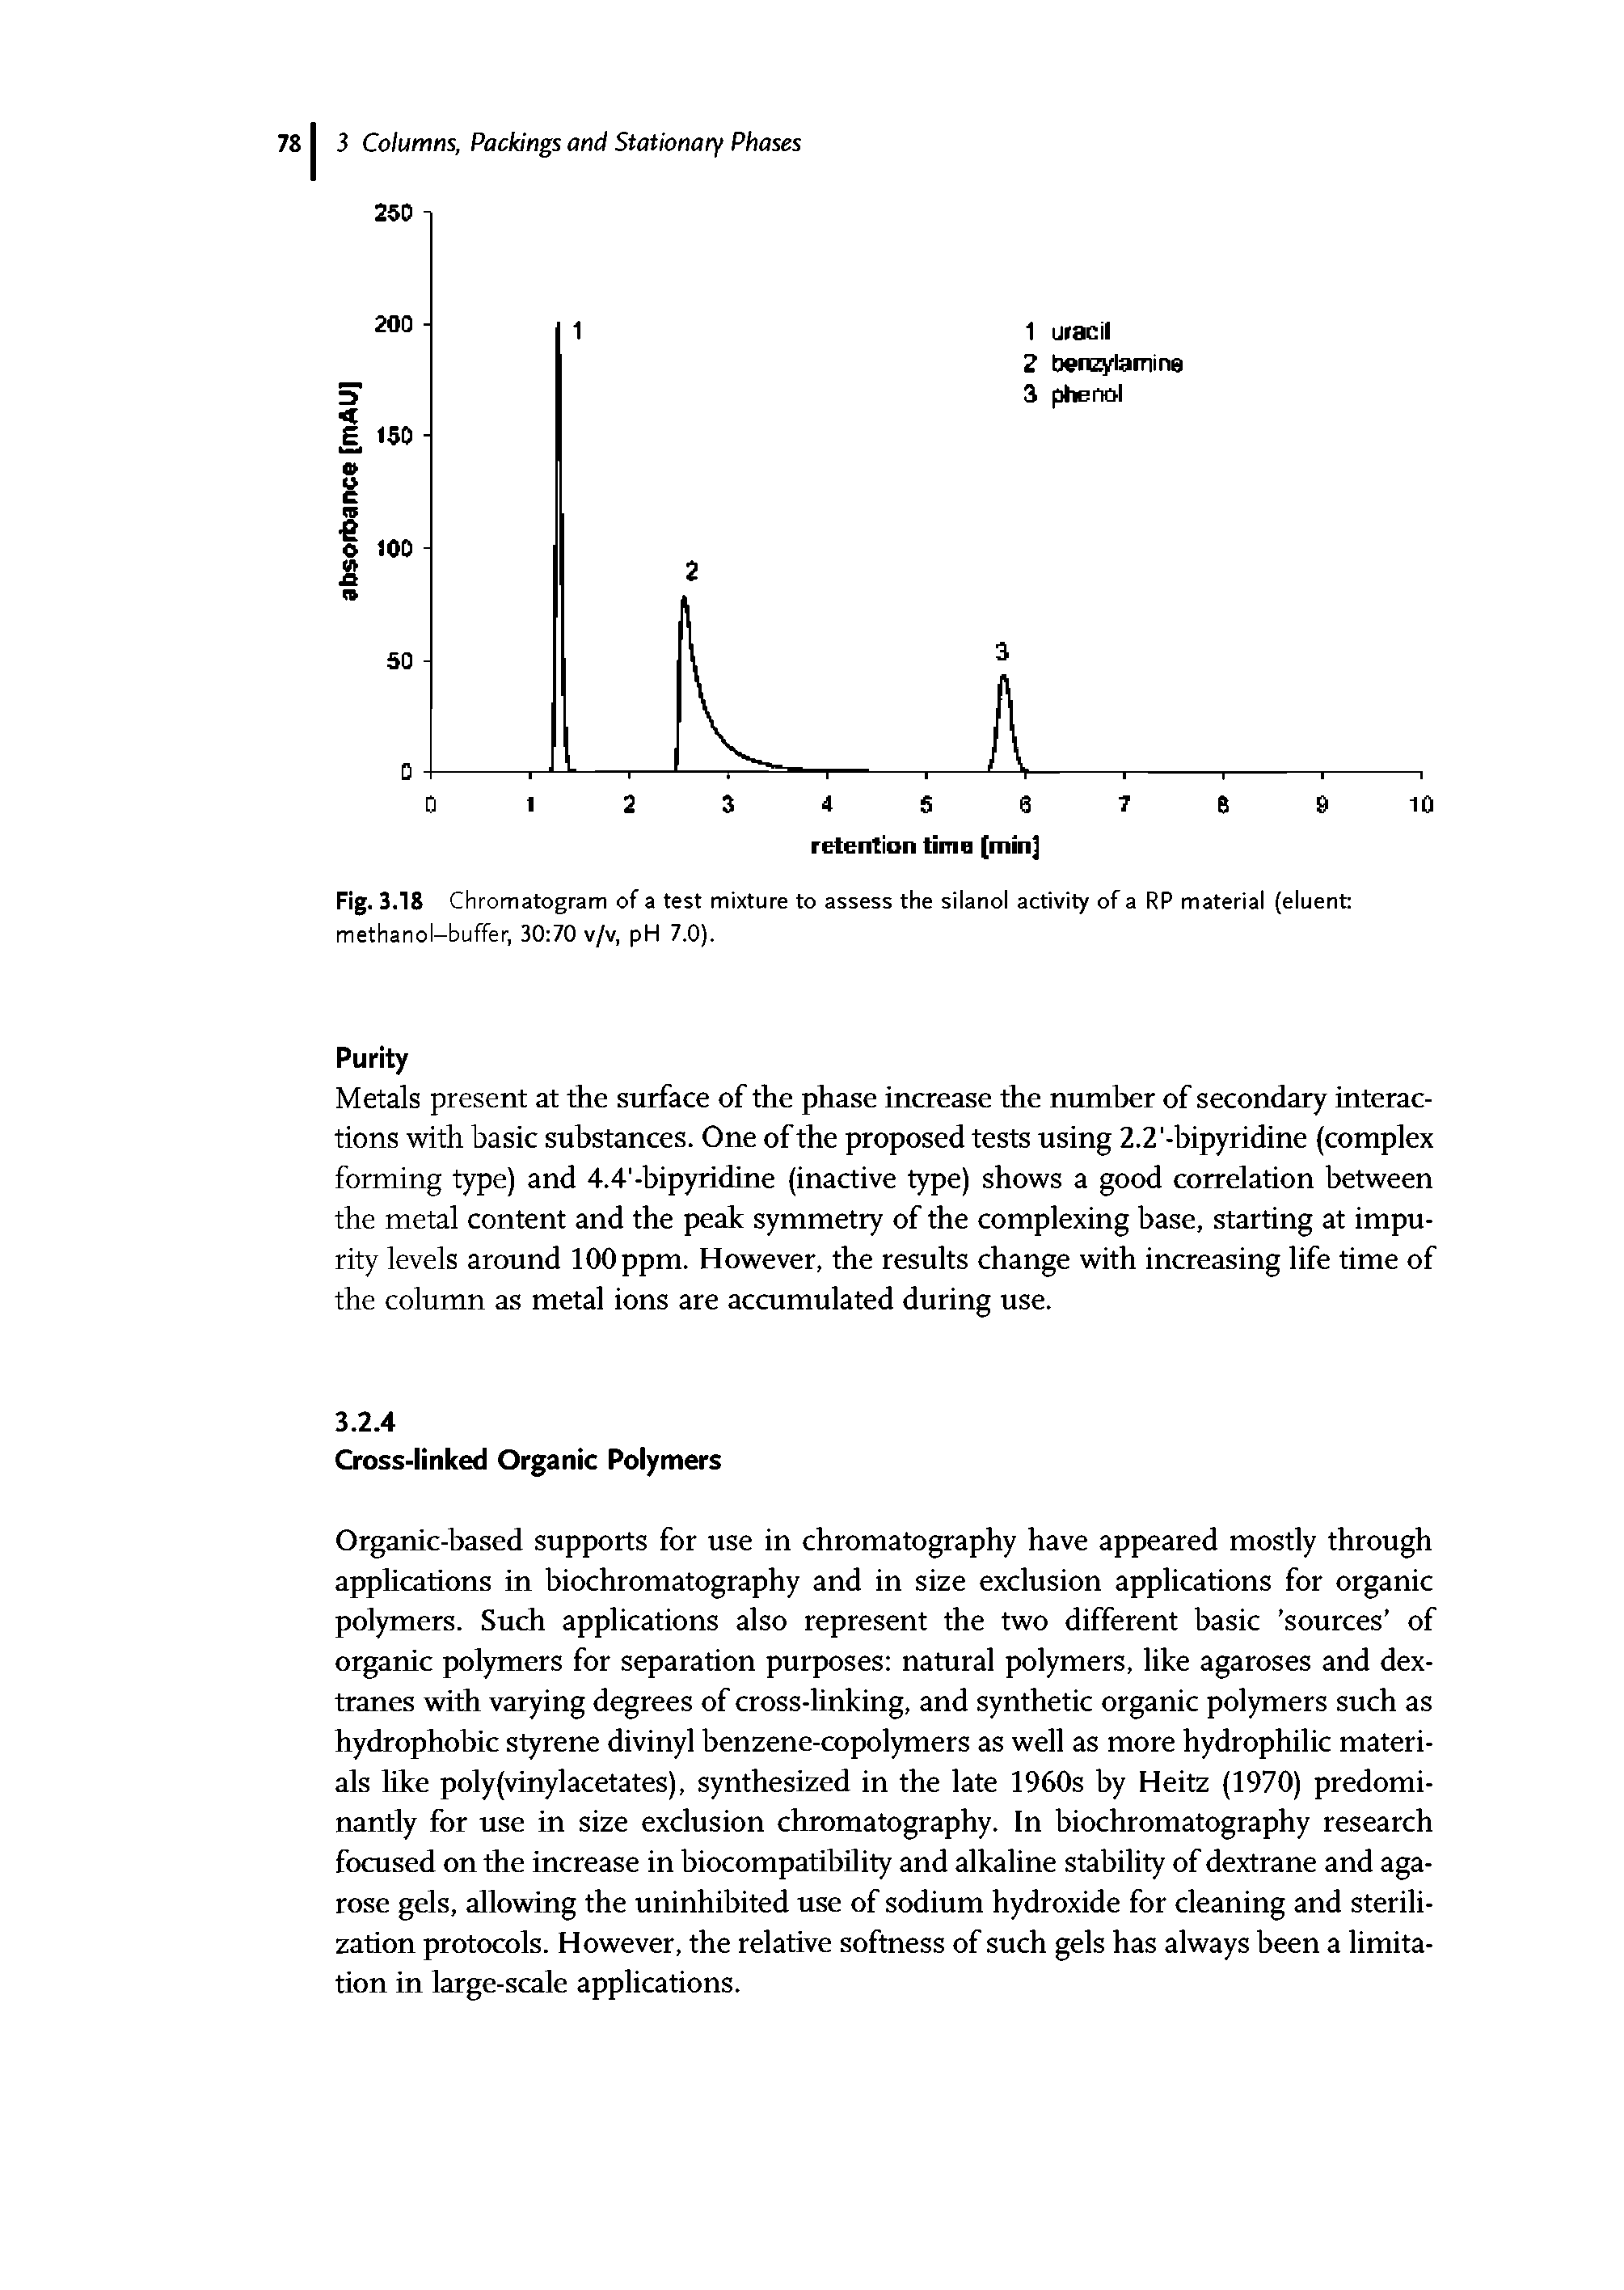 Fig. 3.18 Chromatogram of a test mixture to assess the silanol activity of a RP material (eluent methanol-buffer, 30 70 v/v, pH 7.0).